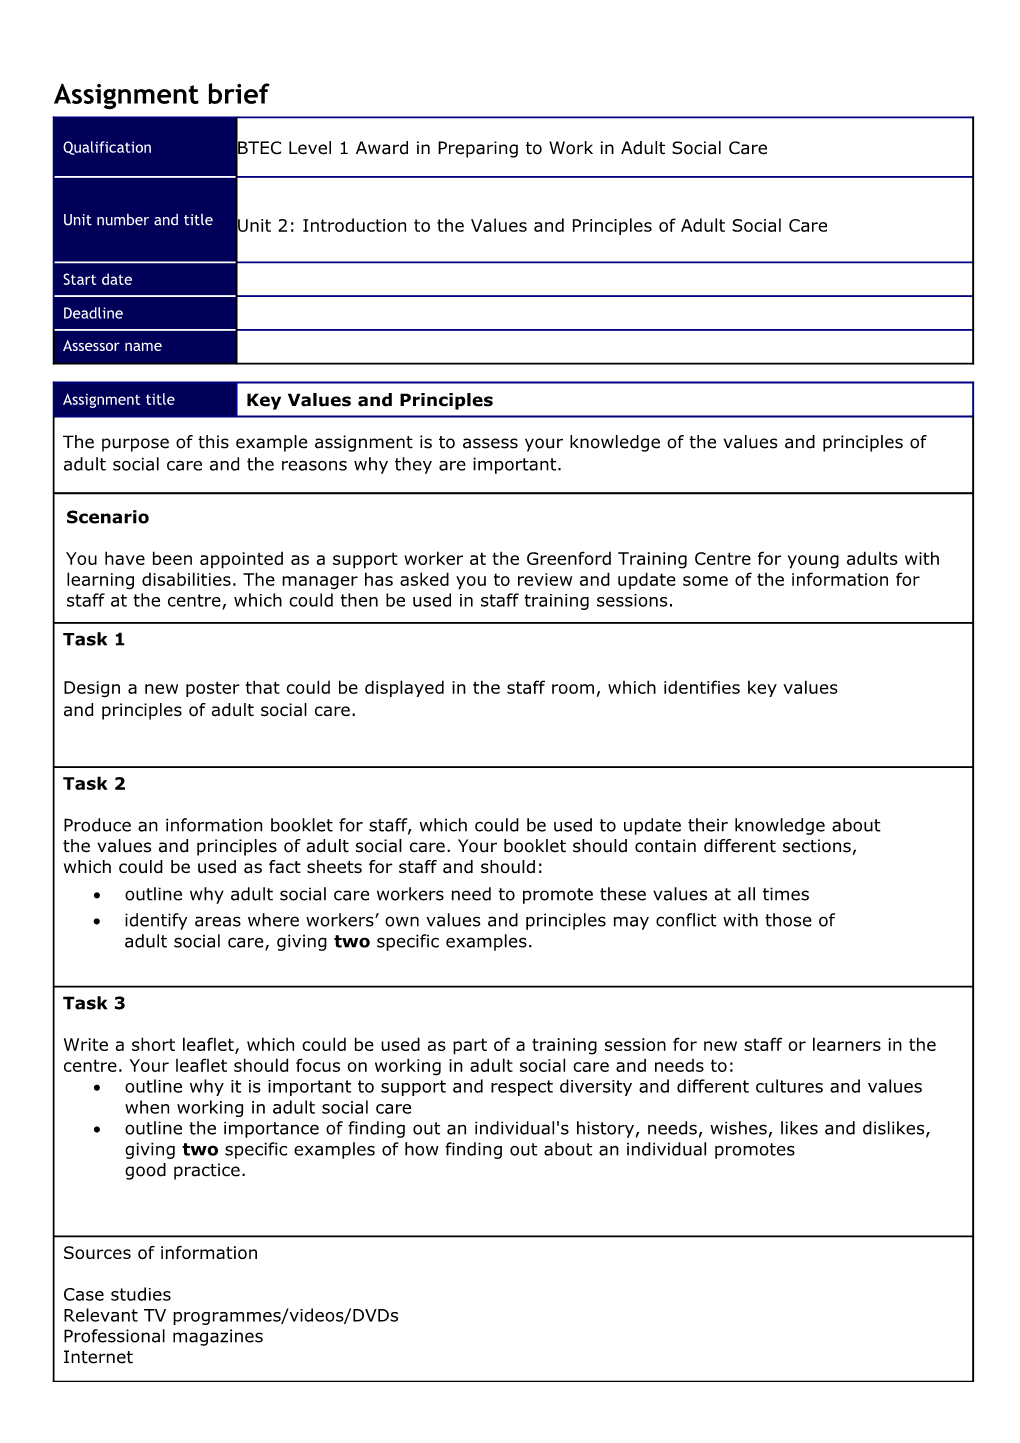 Unit 2 - Values and Principles of Adult Social Care